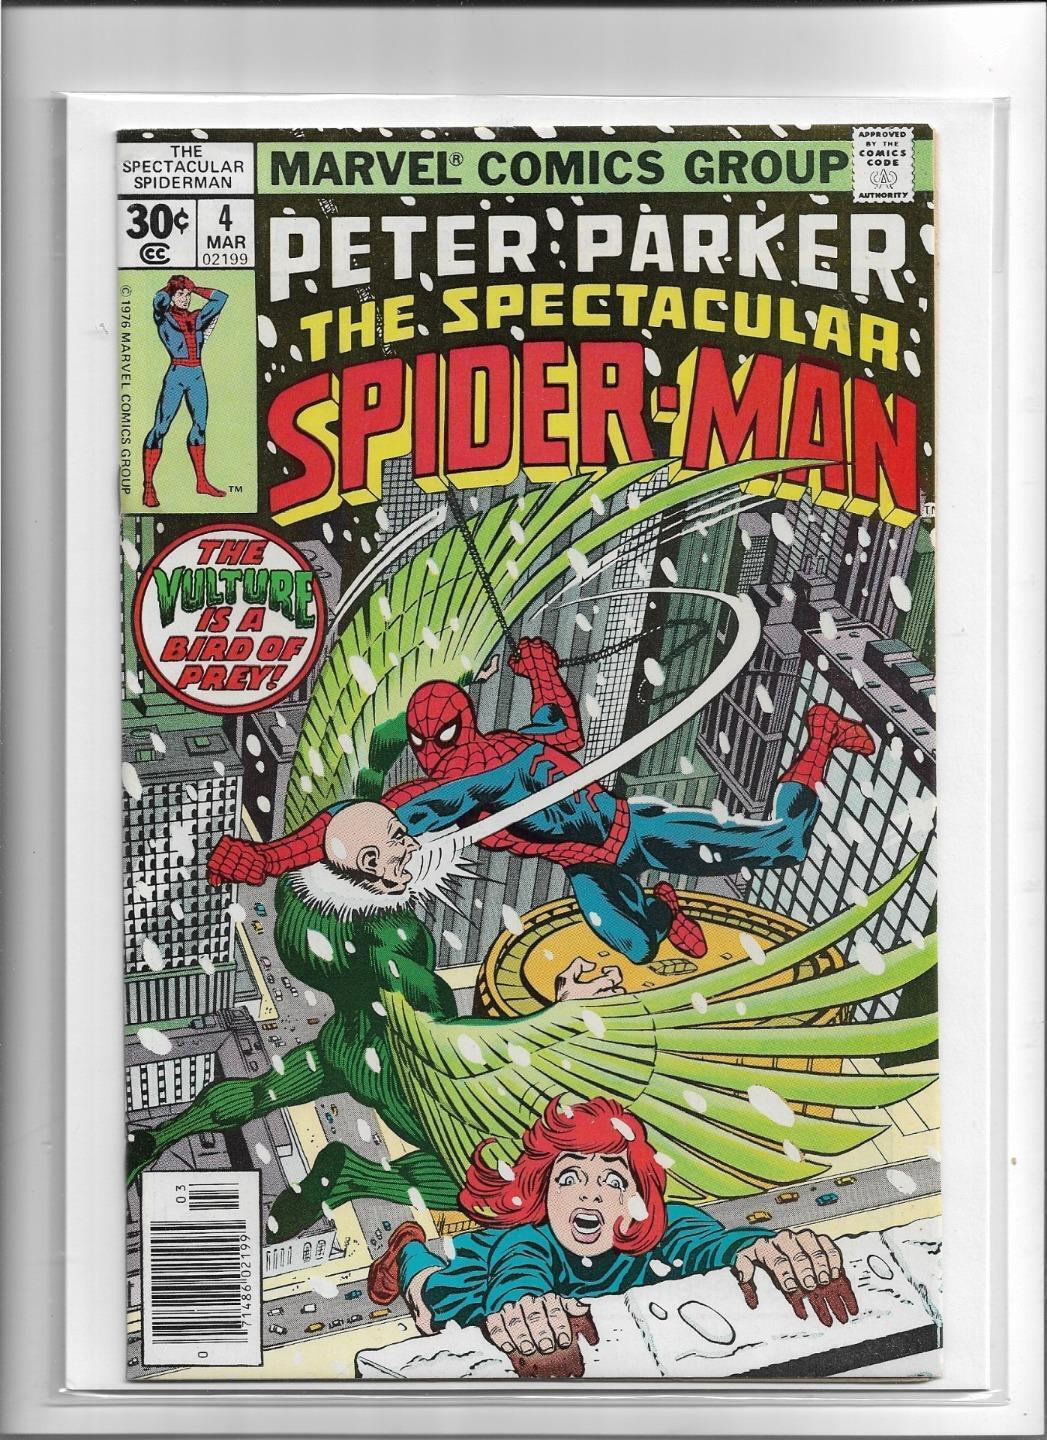 THE SPECTACULAR SPIDER-MAN #4 1977 VERY FINE+ 8.5 3160 VULTURE